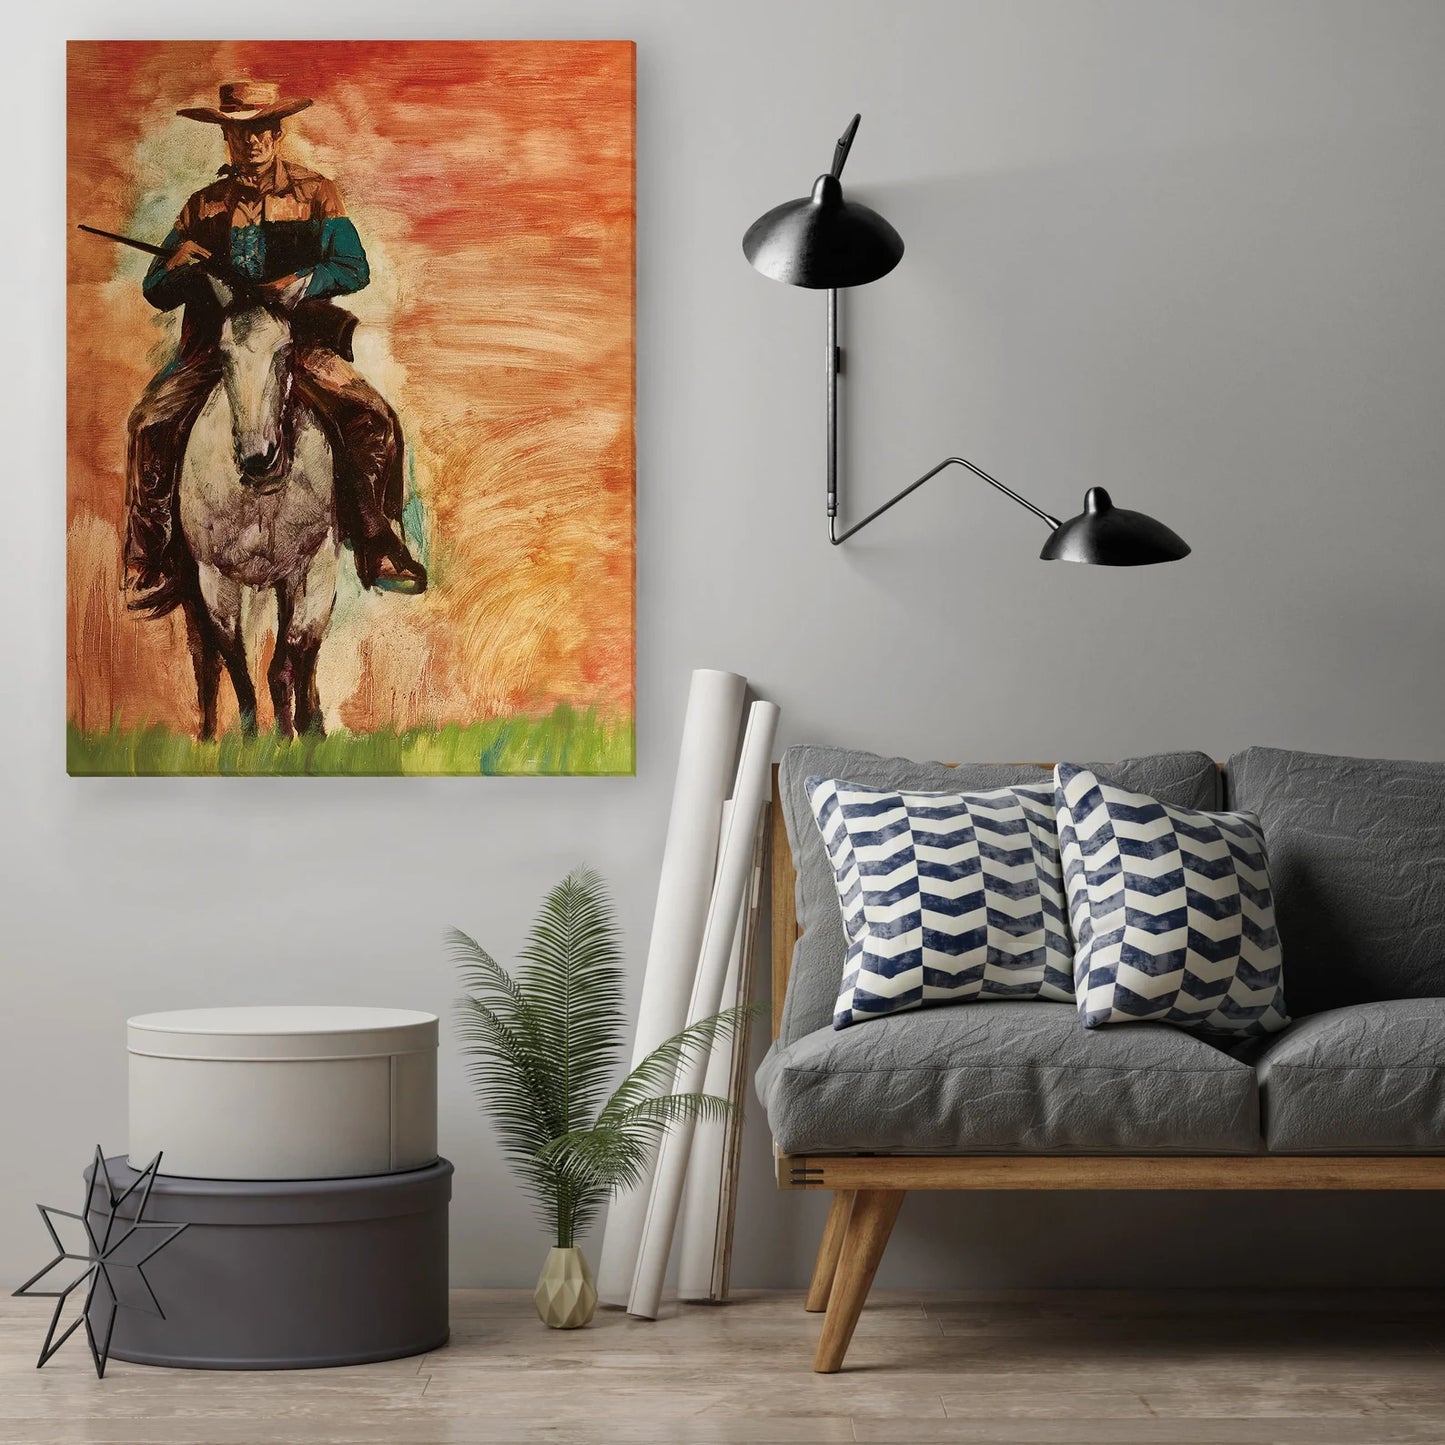 Original "West Cowboy: Riding Alone on the Prairie" Hand Painted Artwork for Living Room, Bedroom, Foyer, Bar or Office - Framed Canvas